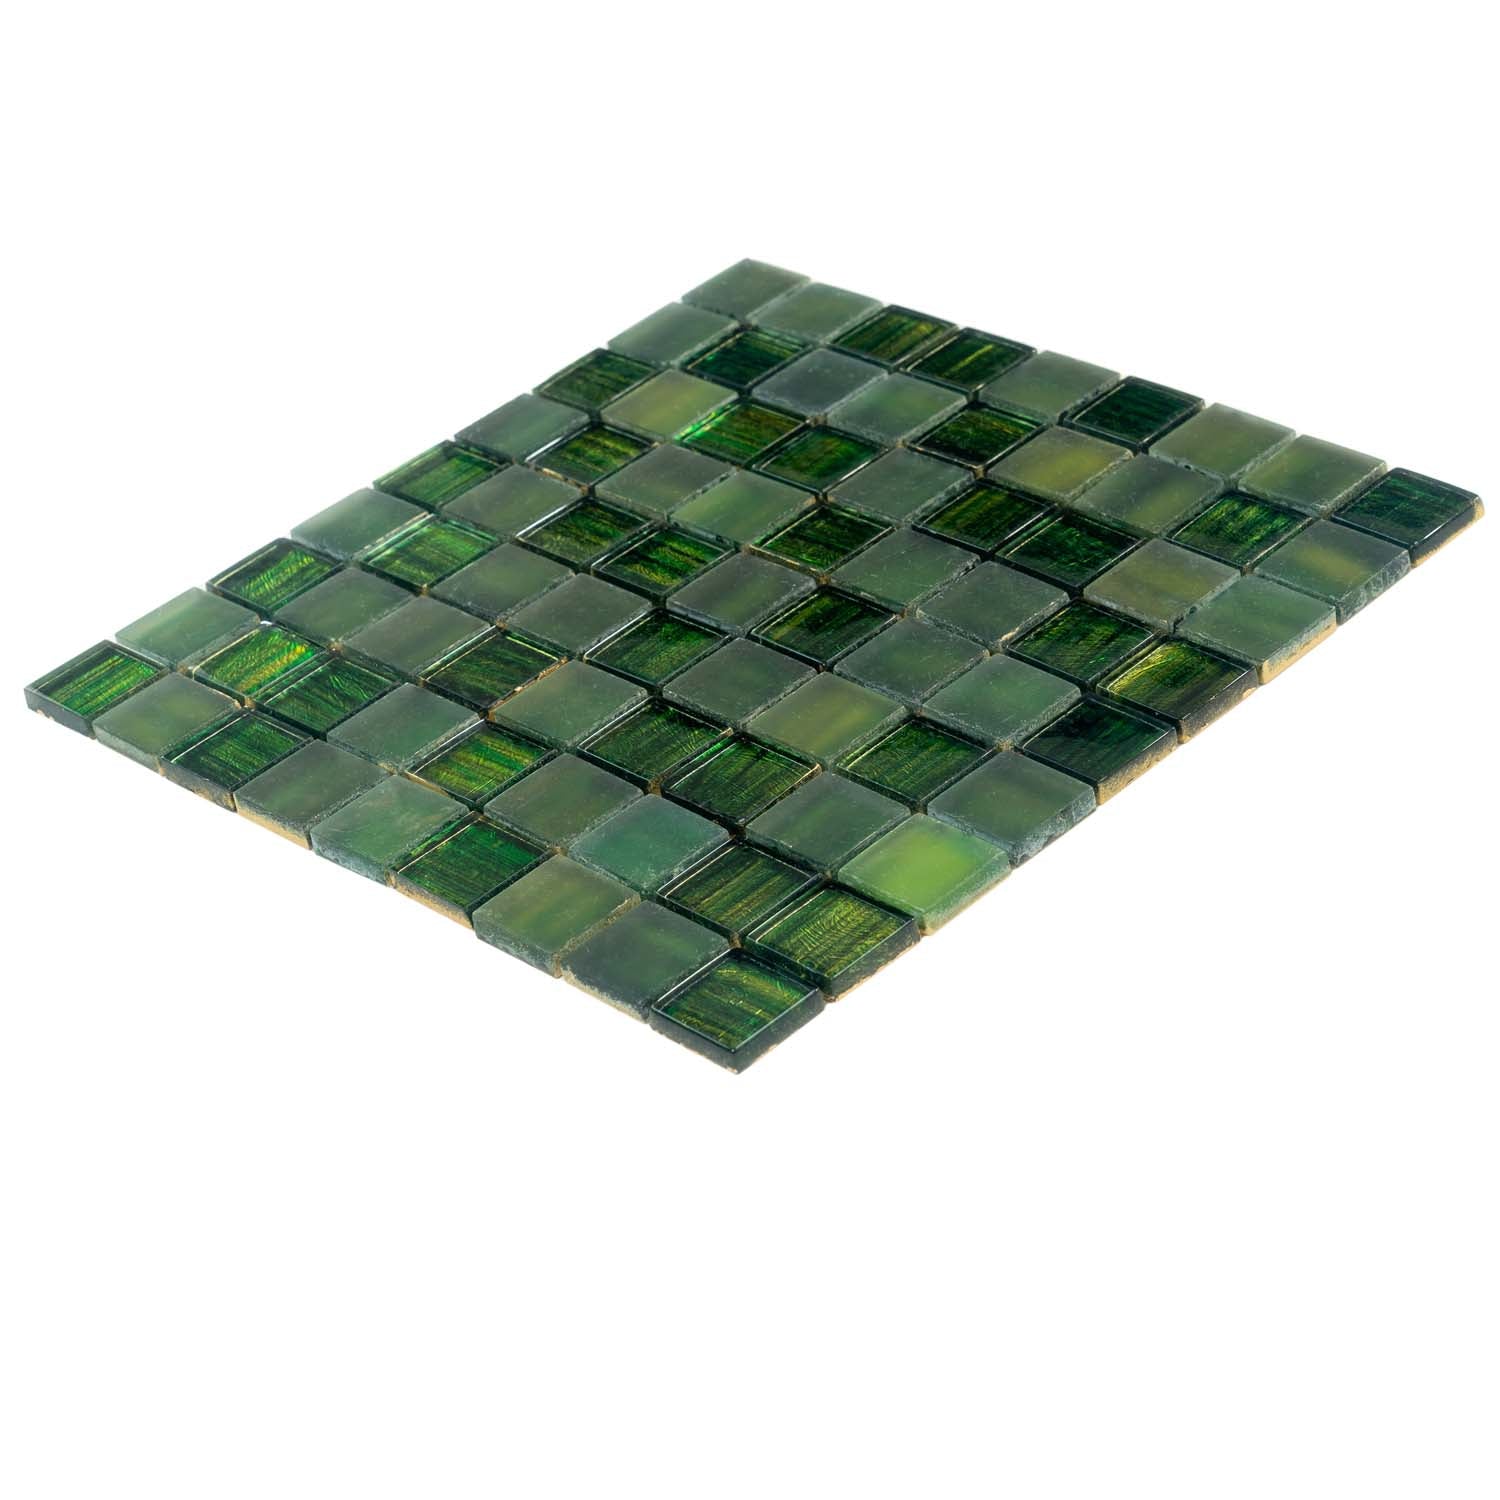 11x11 Emerald Green Matte Finished Glass Tile